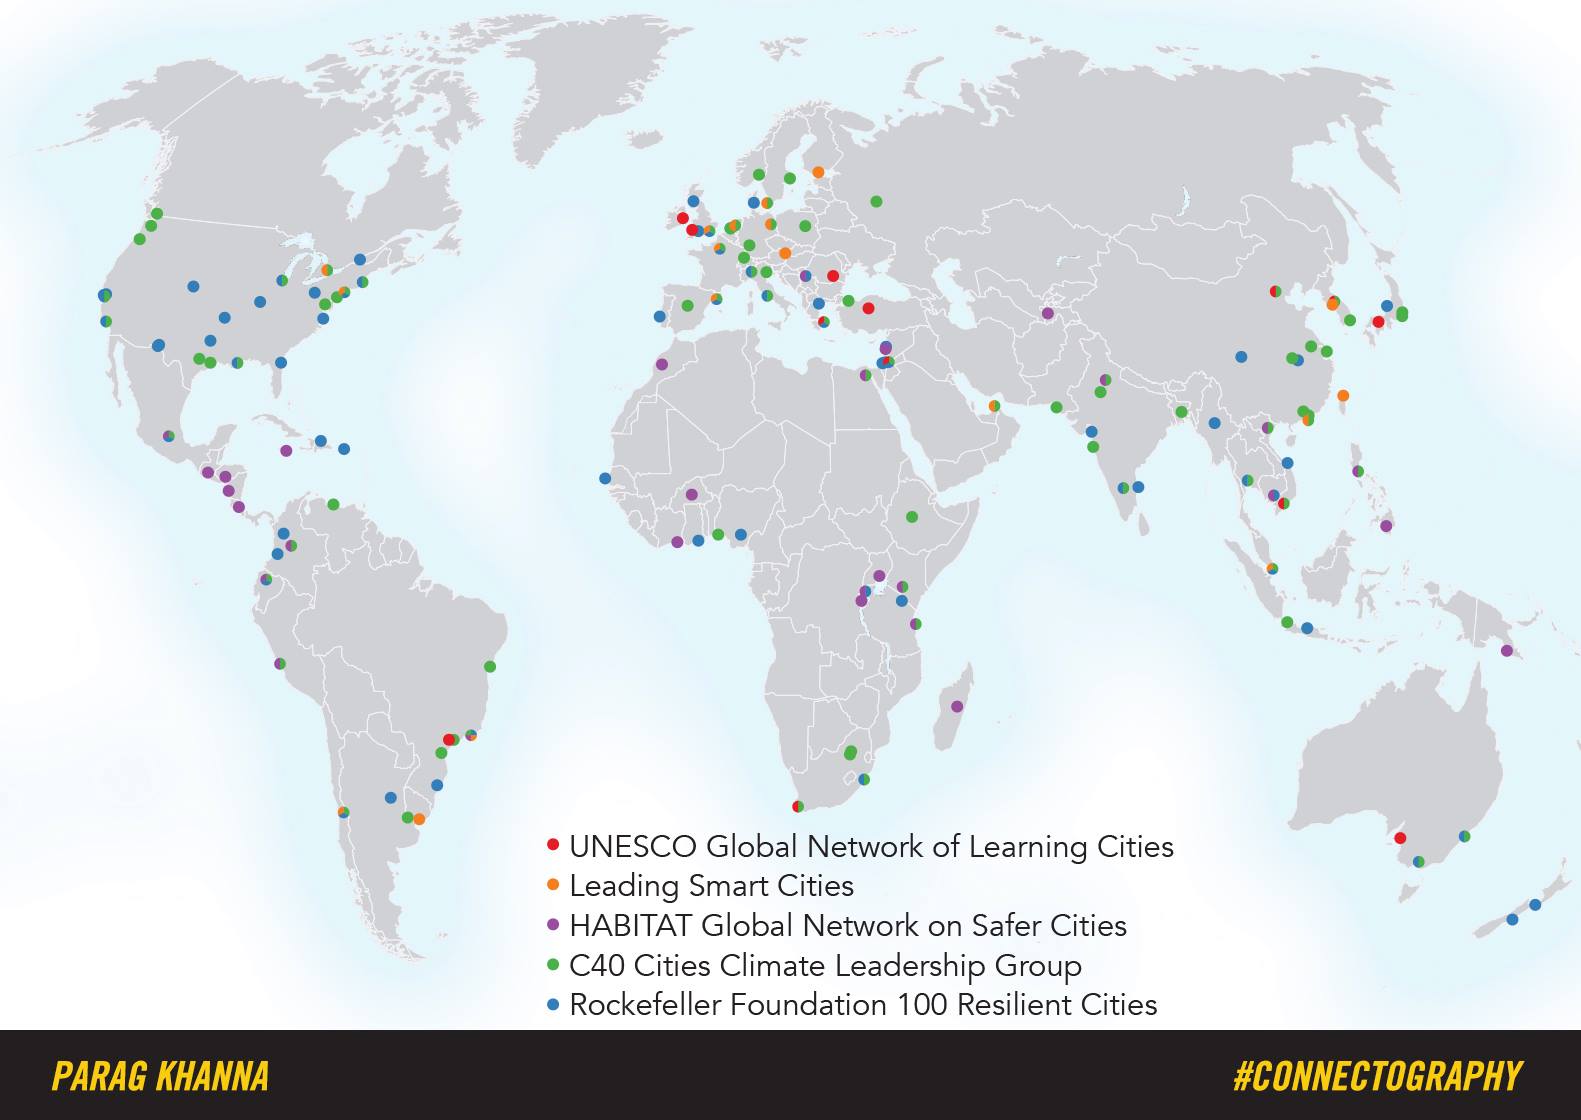 The Growth of Inter-city Learning Networks